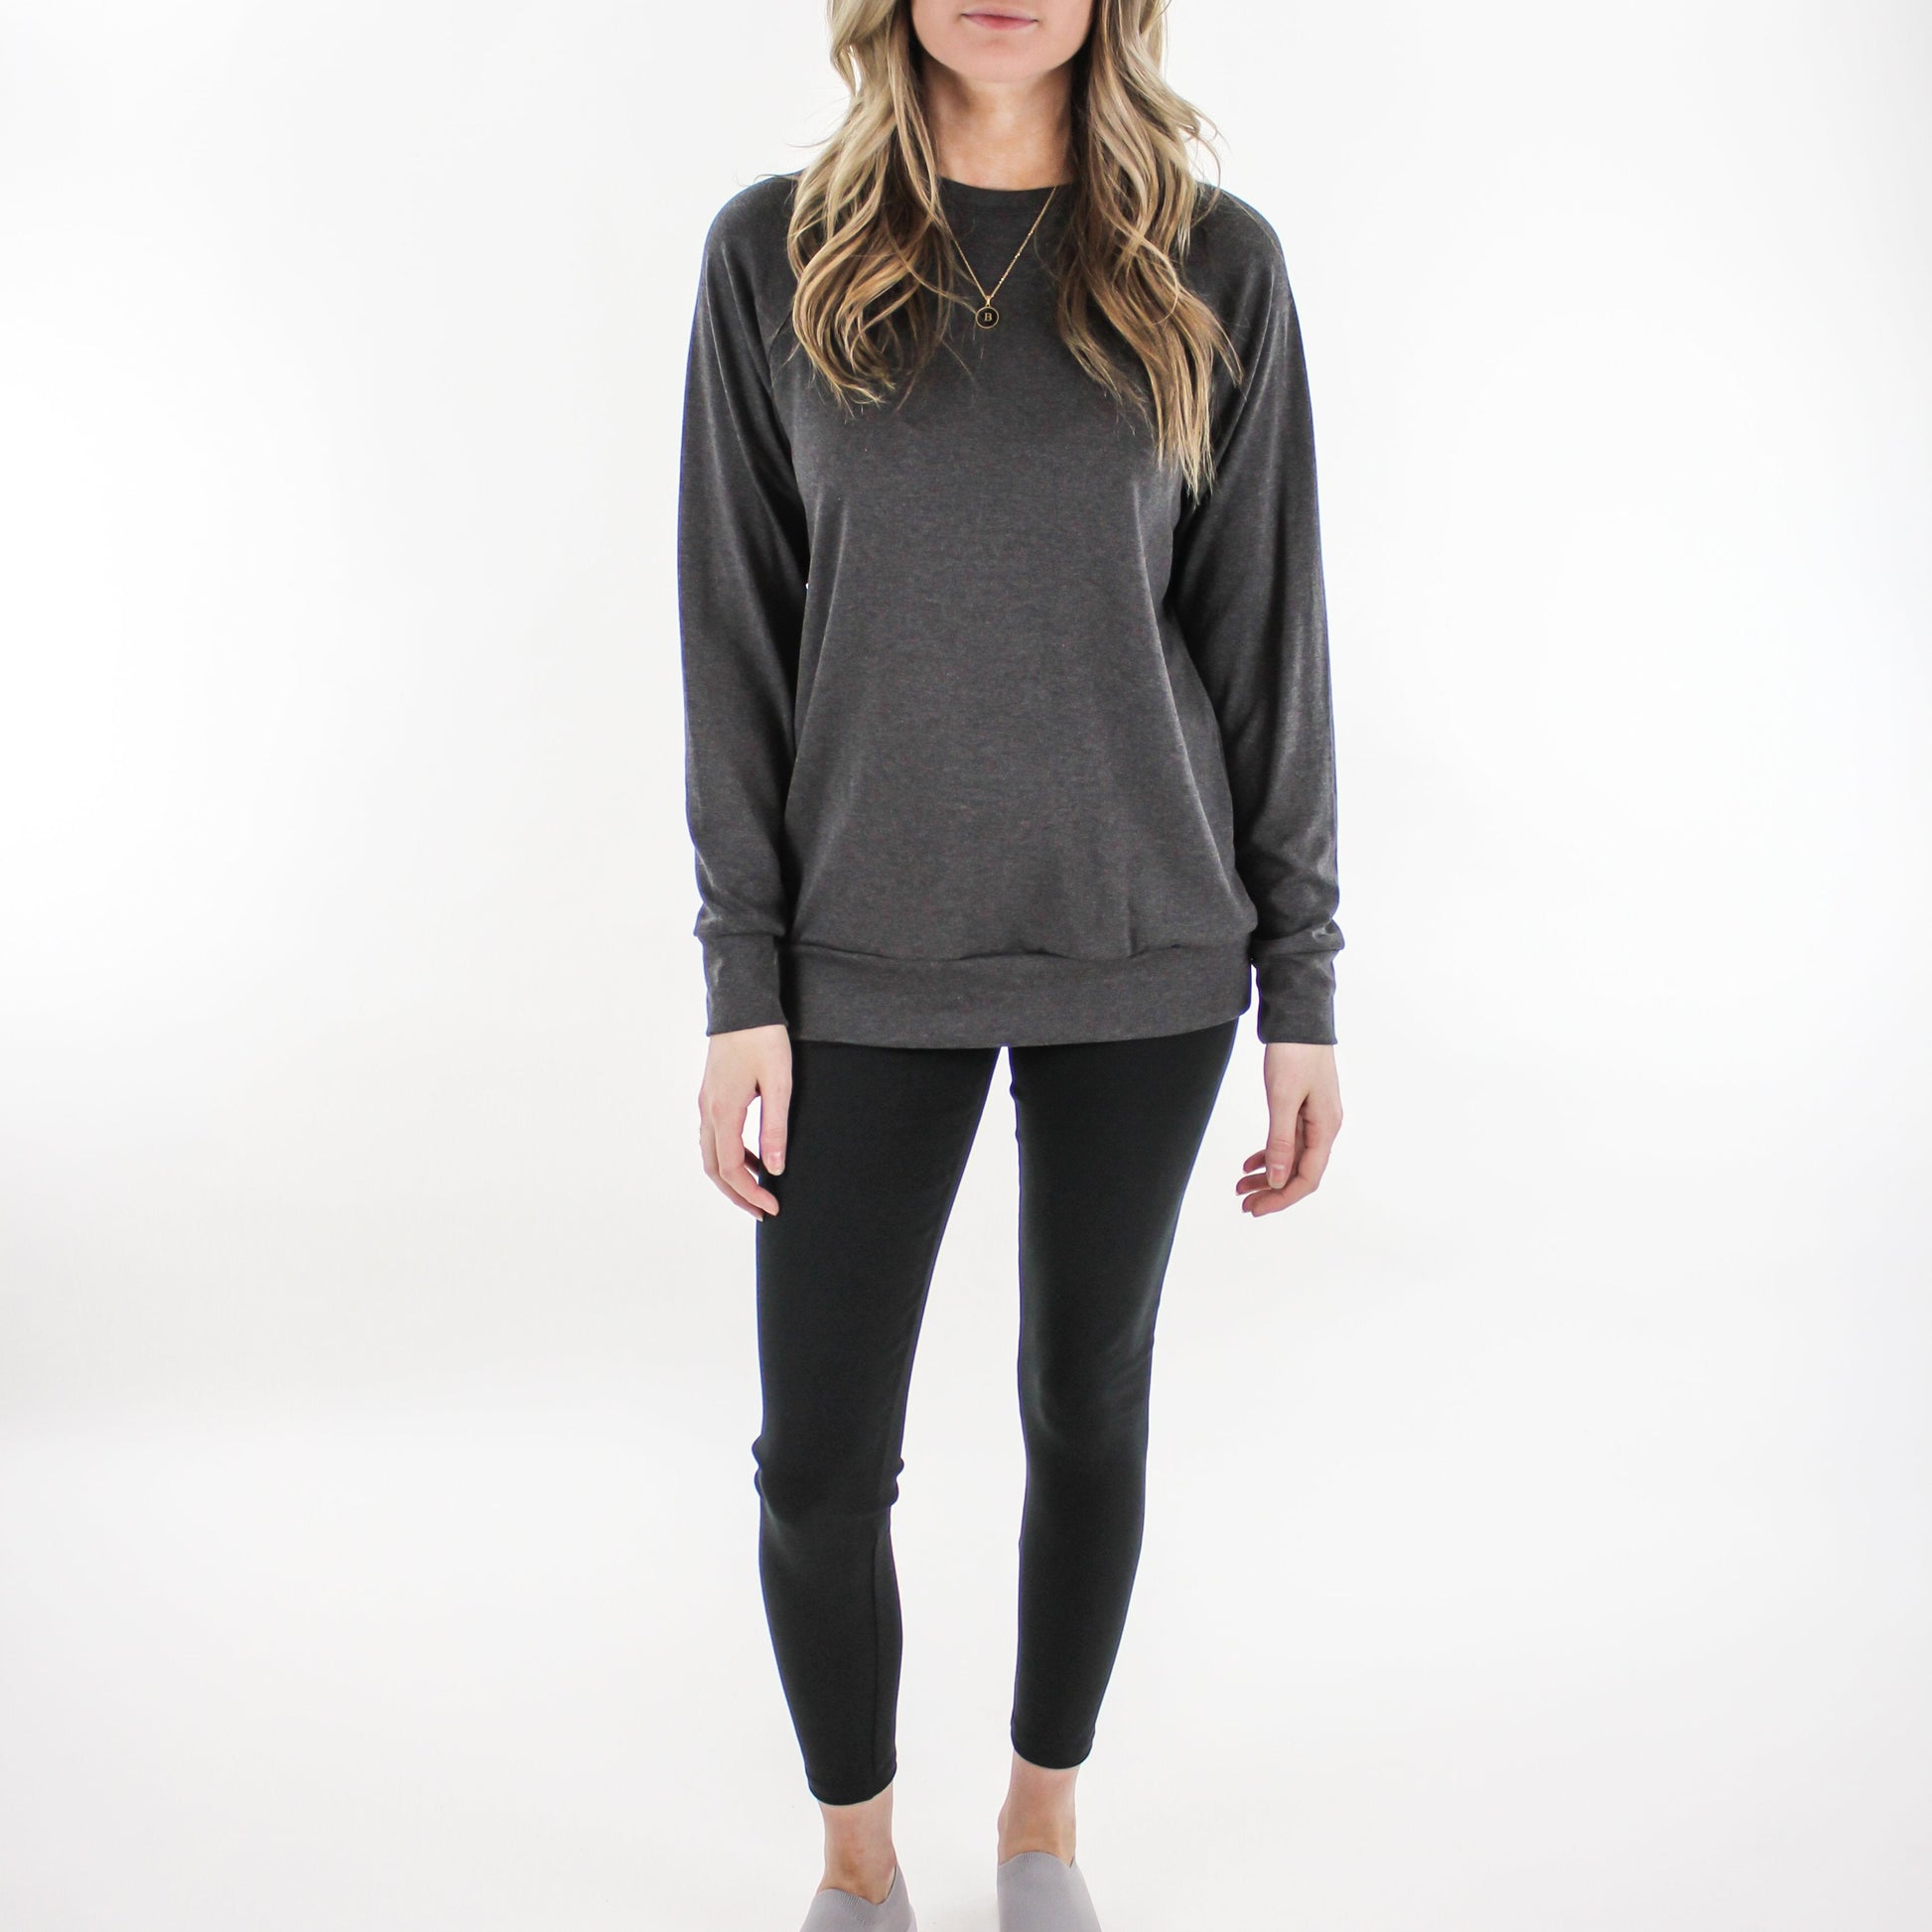 Adult Unisex Pullover | Charcoal